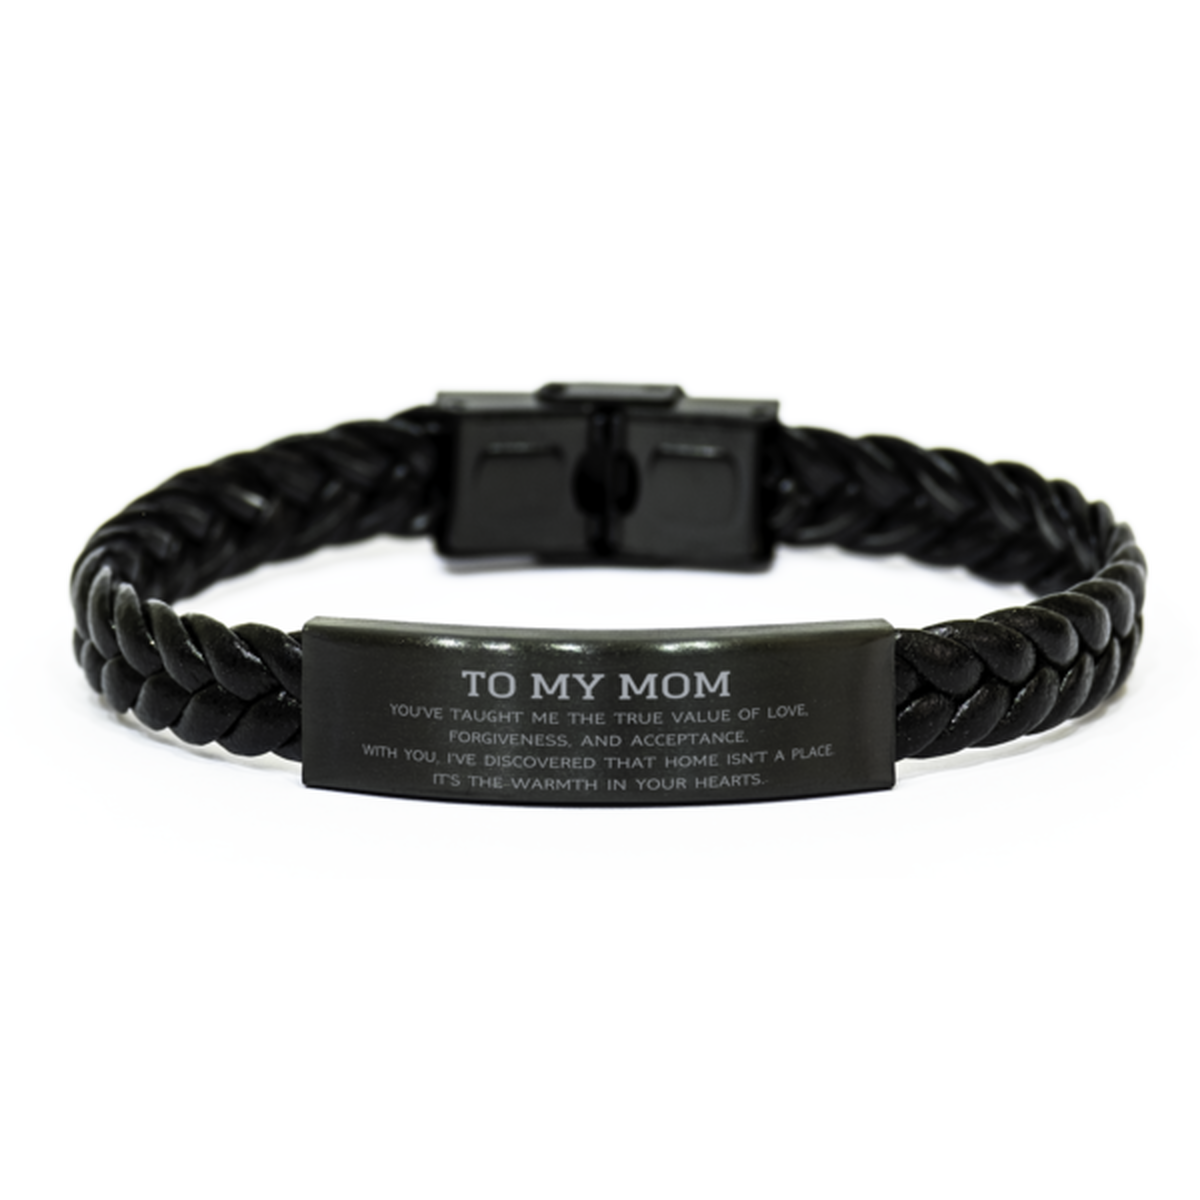 To My Mom Gifts, You've taught me the true value of love, Thank You Gifts For Mom, Birthday Braided Leather Bracelet For Mom